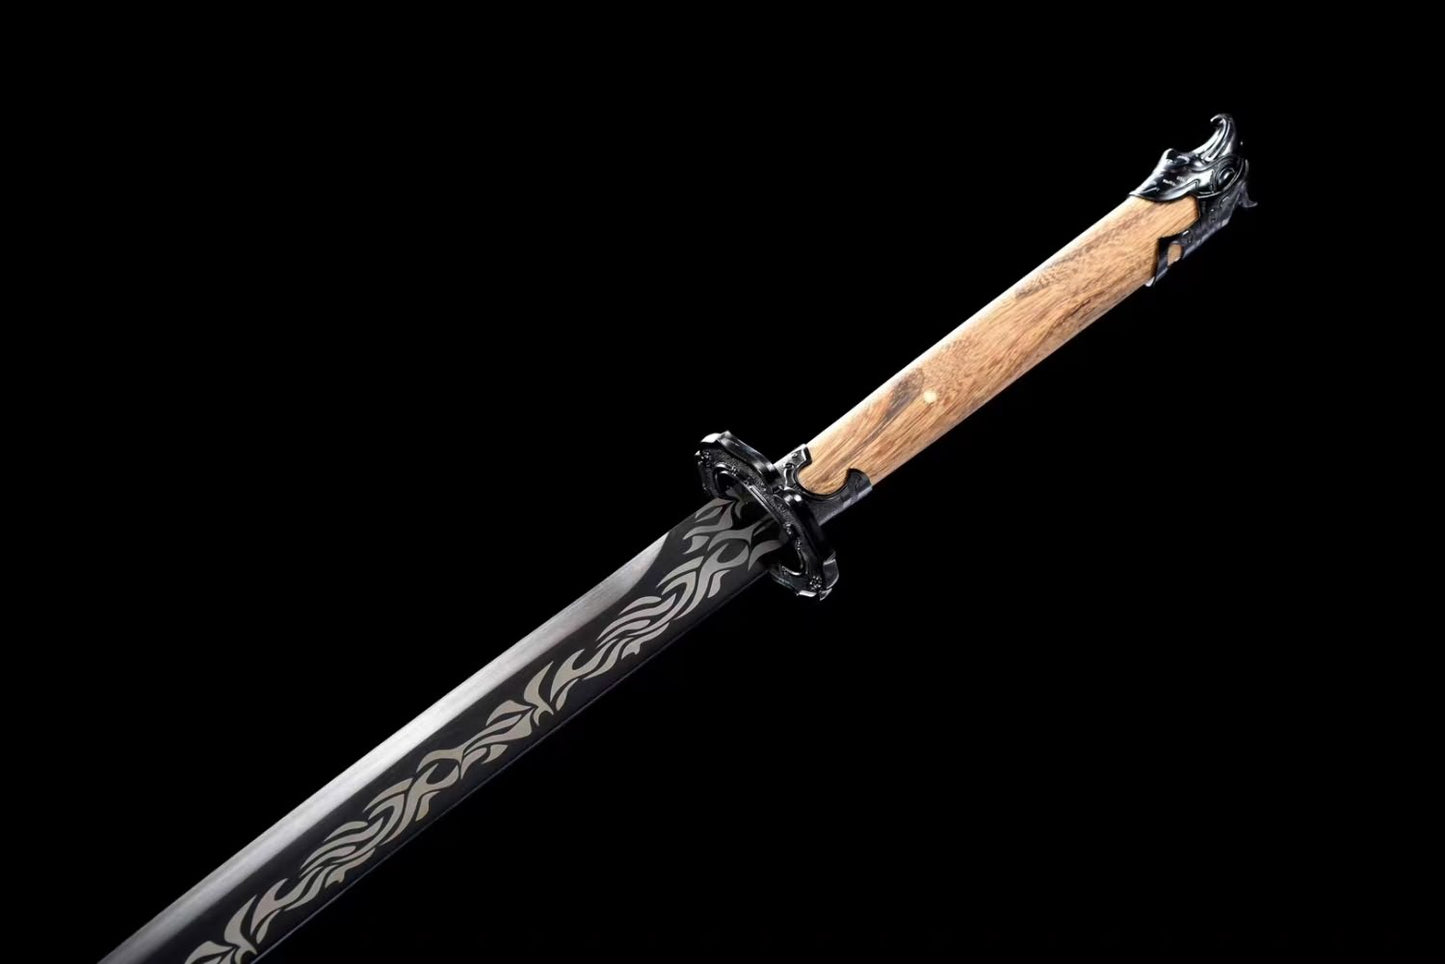 Eagle Sword Real Forged High Carbon Steel Blade,Alloy Fittings,Rosewood Scabbard